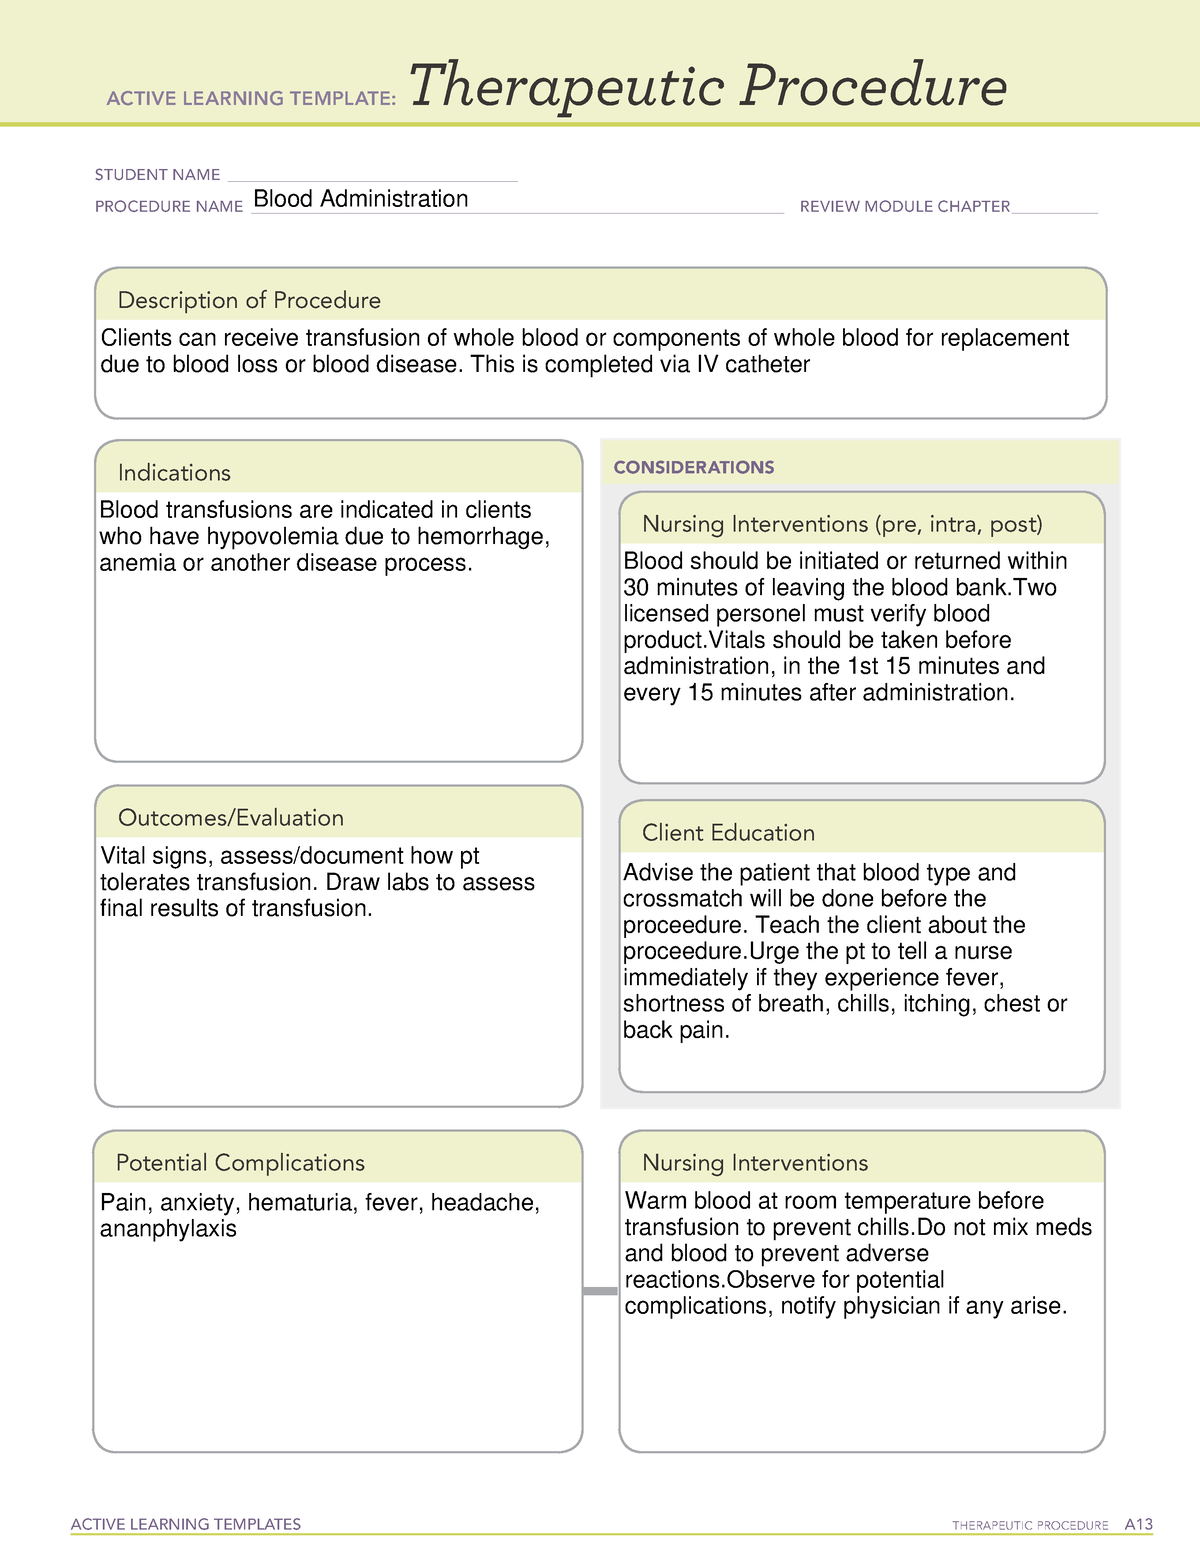 Active Learning Template Therapeutic Procedure Form ACTIVE LEARNING TEMPLATES THERAPEUTIC